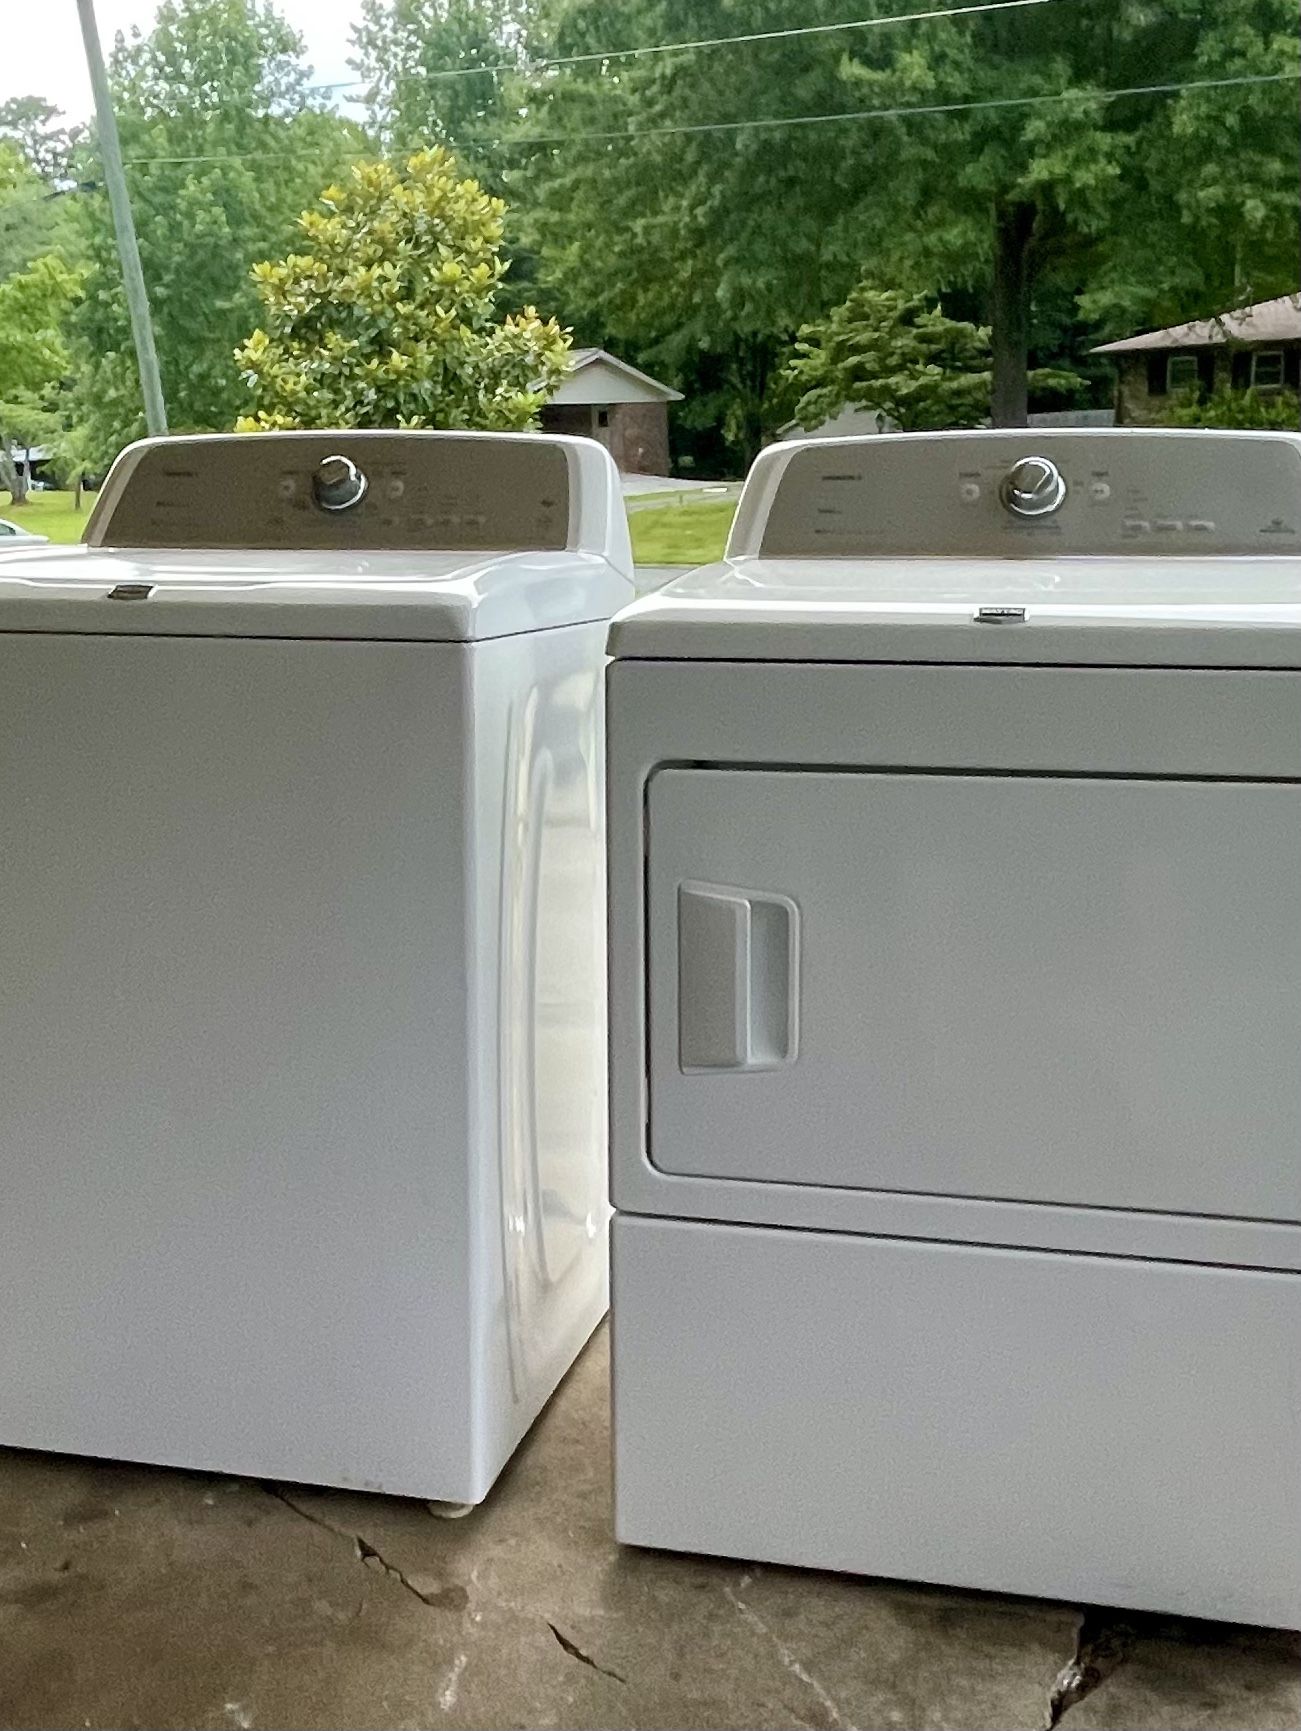 Maytag Bravos X Washer and dryer great condition made in USA will last for ever a steal at 350